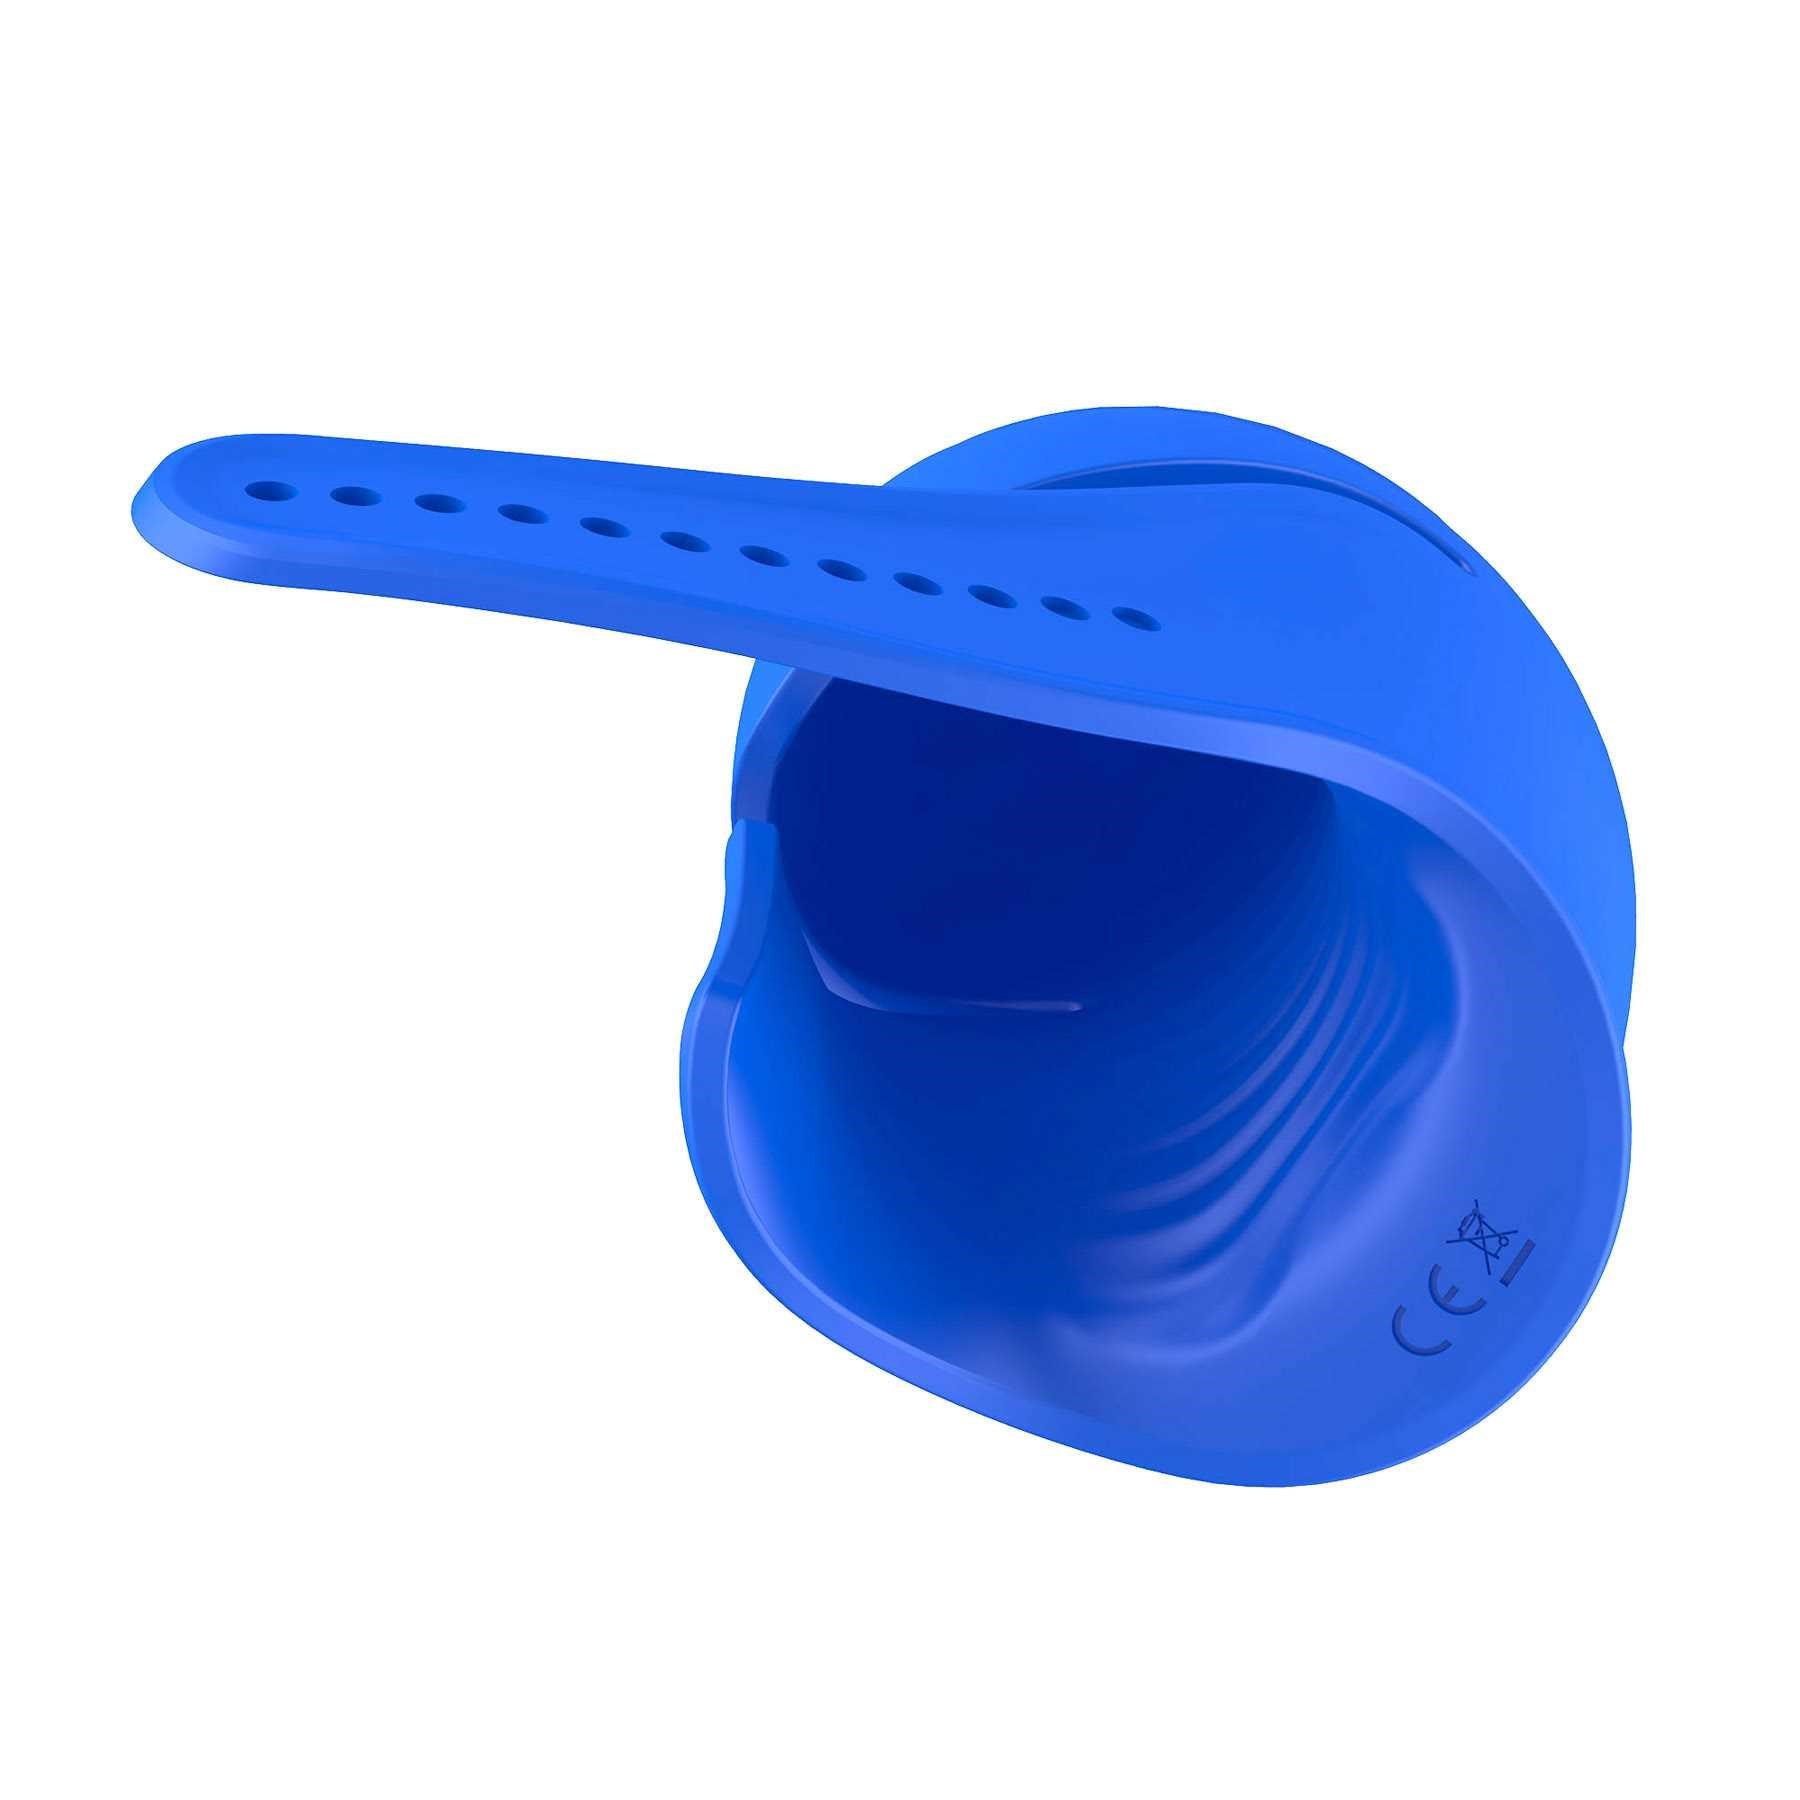 Gladiator Tip Vibrator laying on table blue